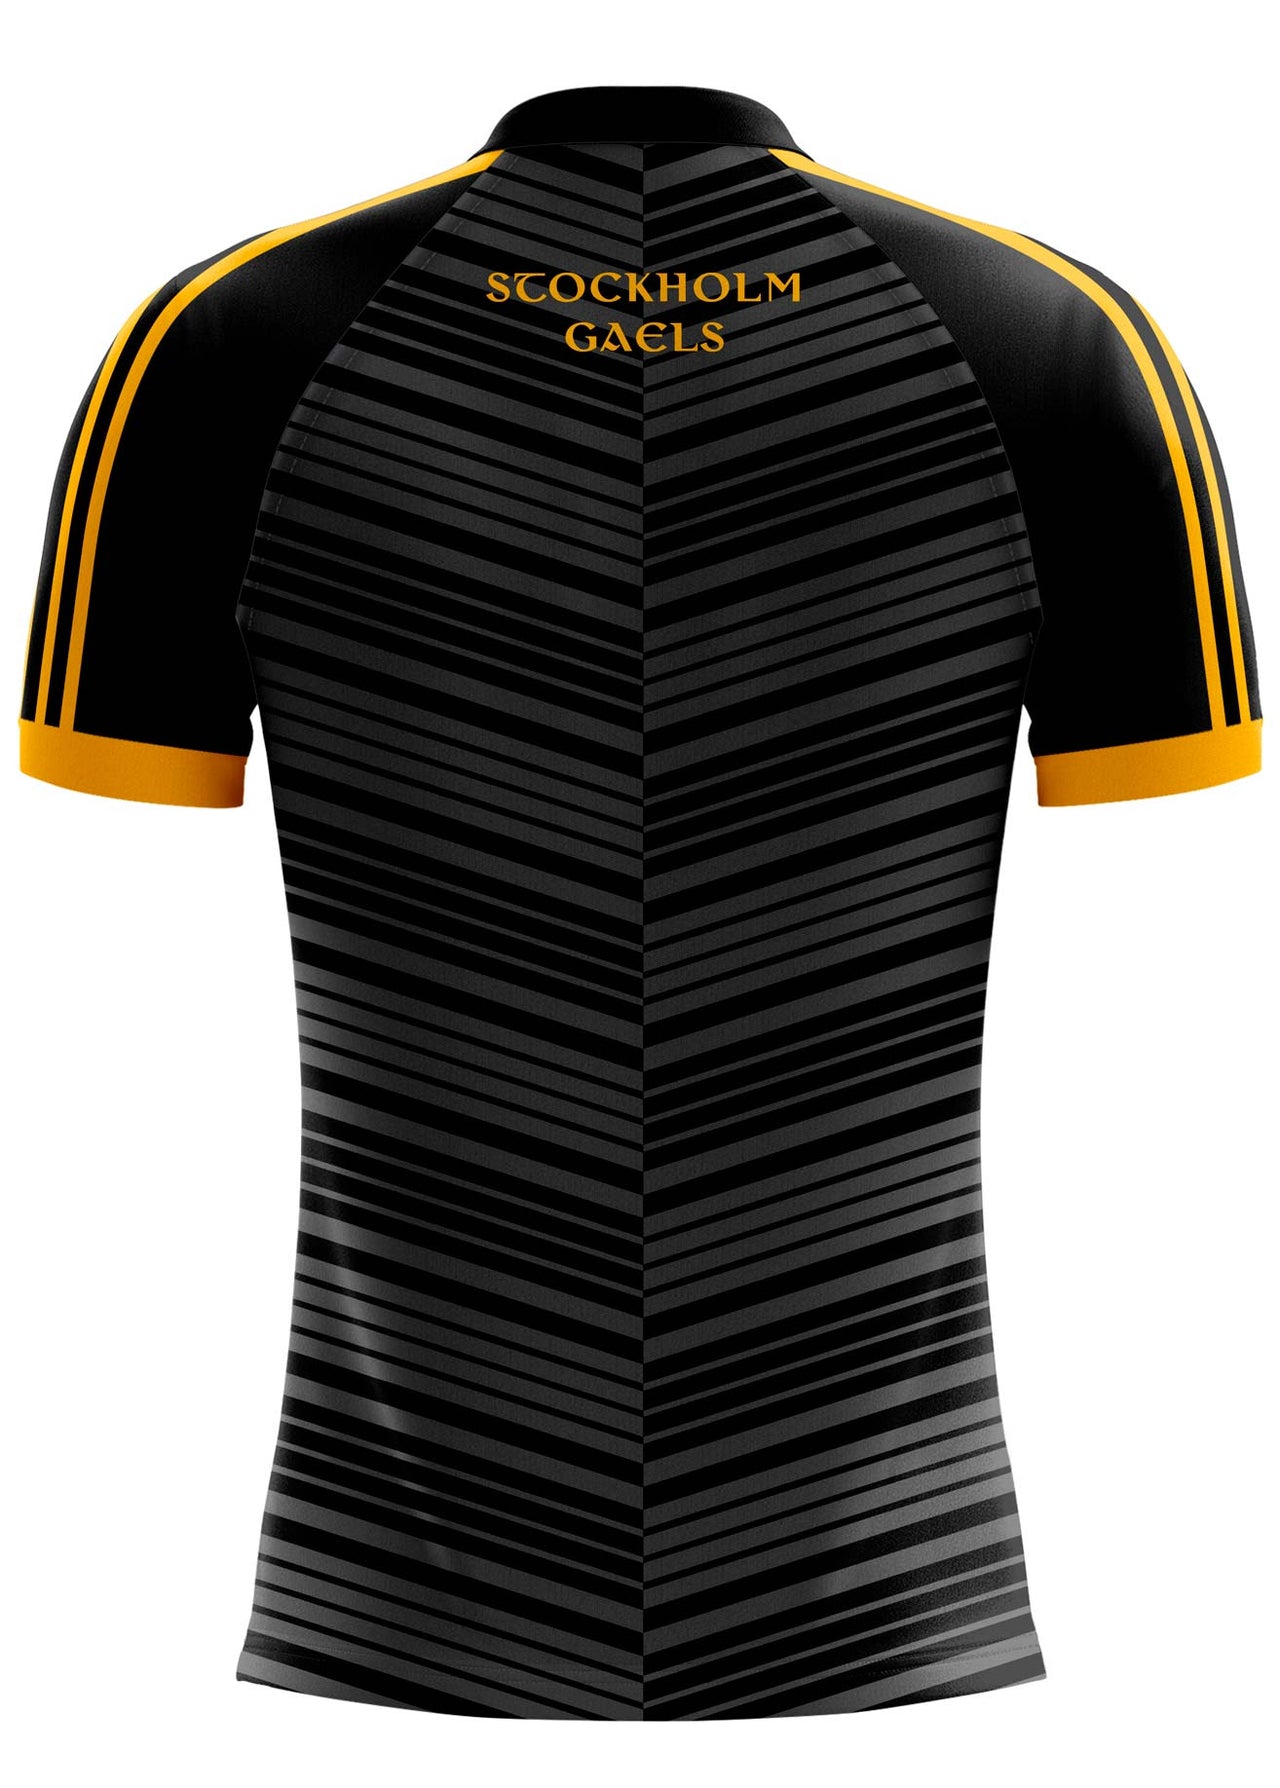 Stockholm Gaels Home Jersey Player Fit Adult